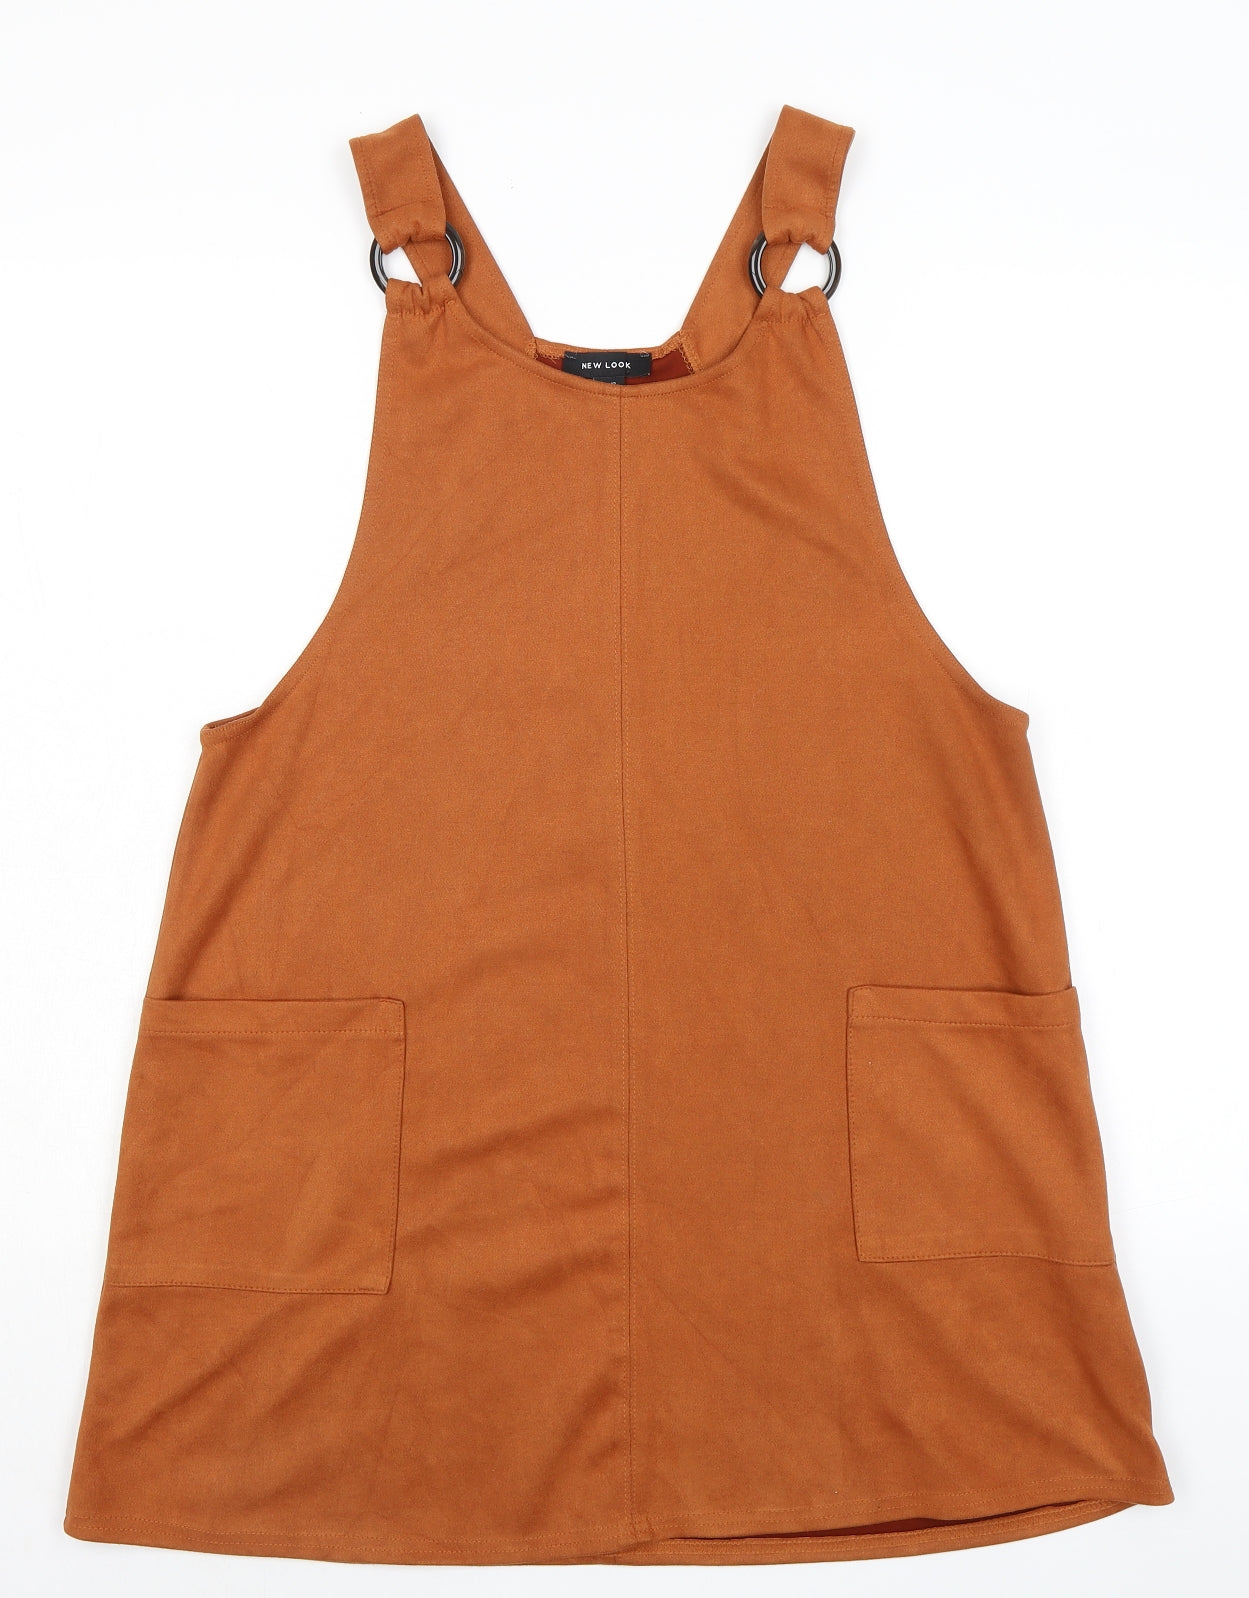 New Look Womens Orange Polyester Pinafore/Dungaree Dress Size 12 Round Neck Pullover